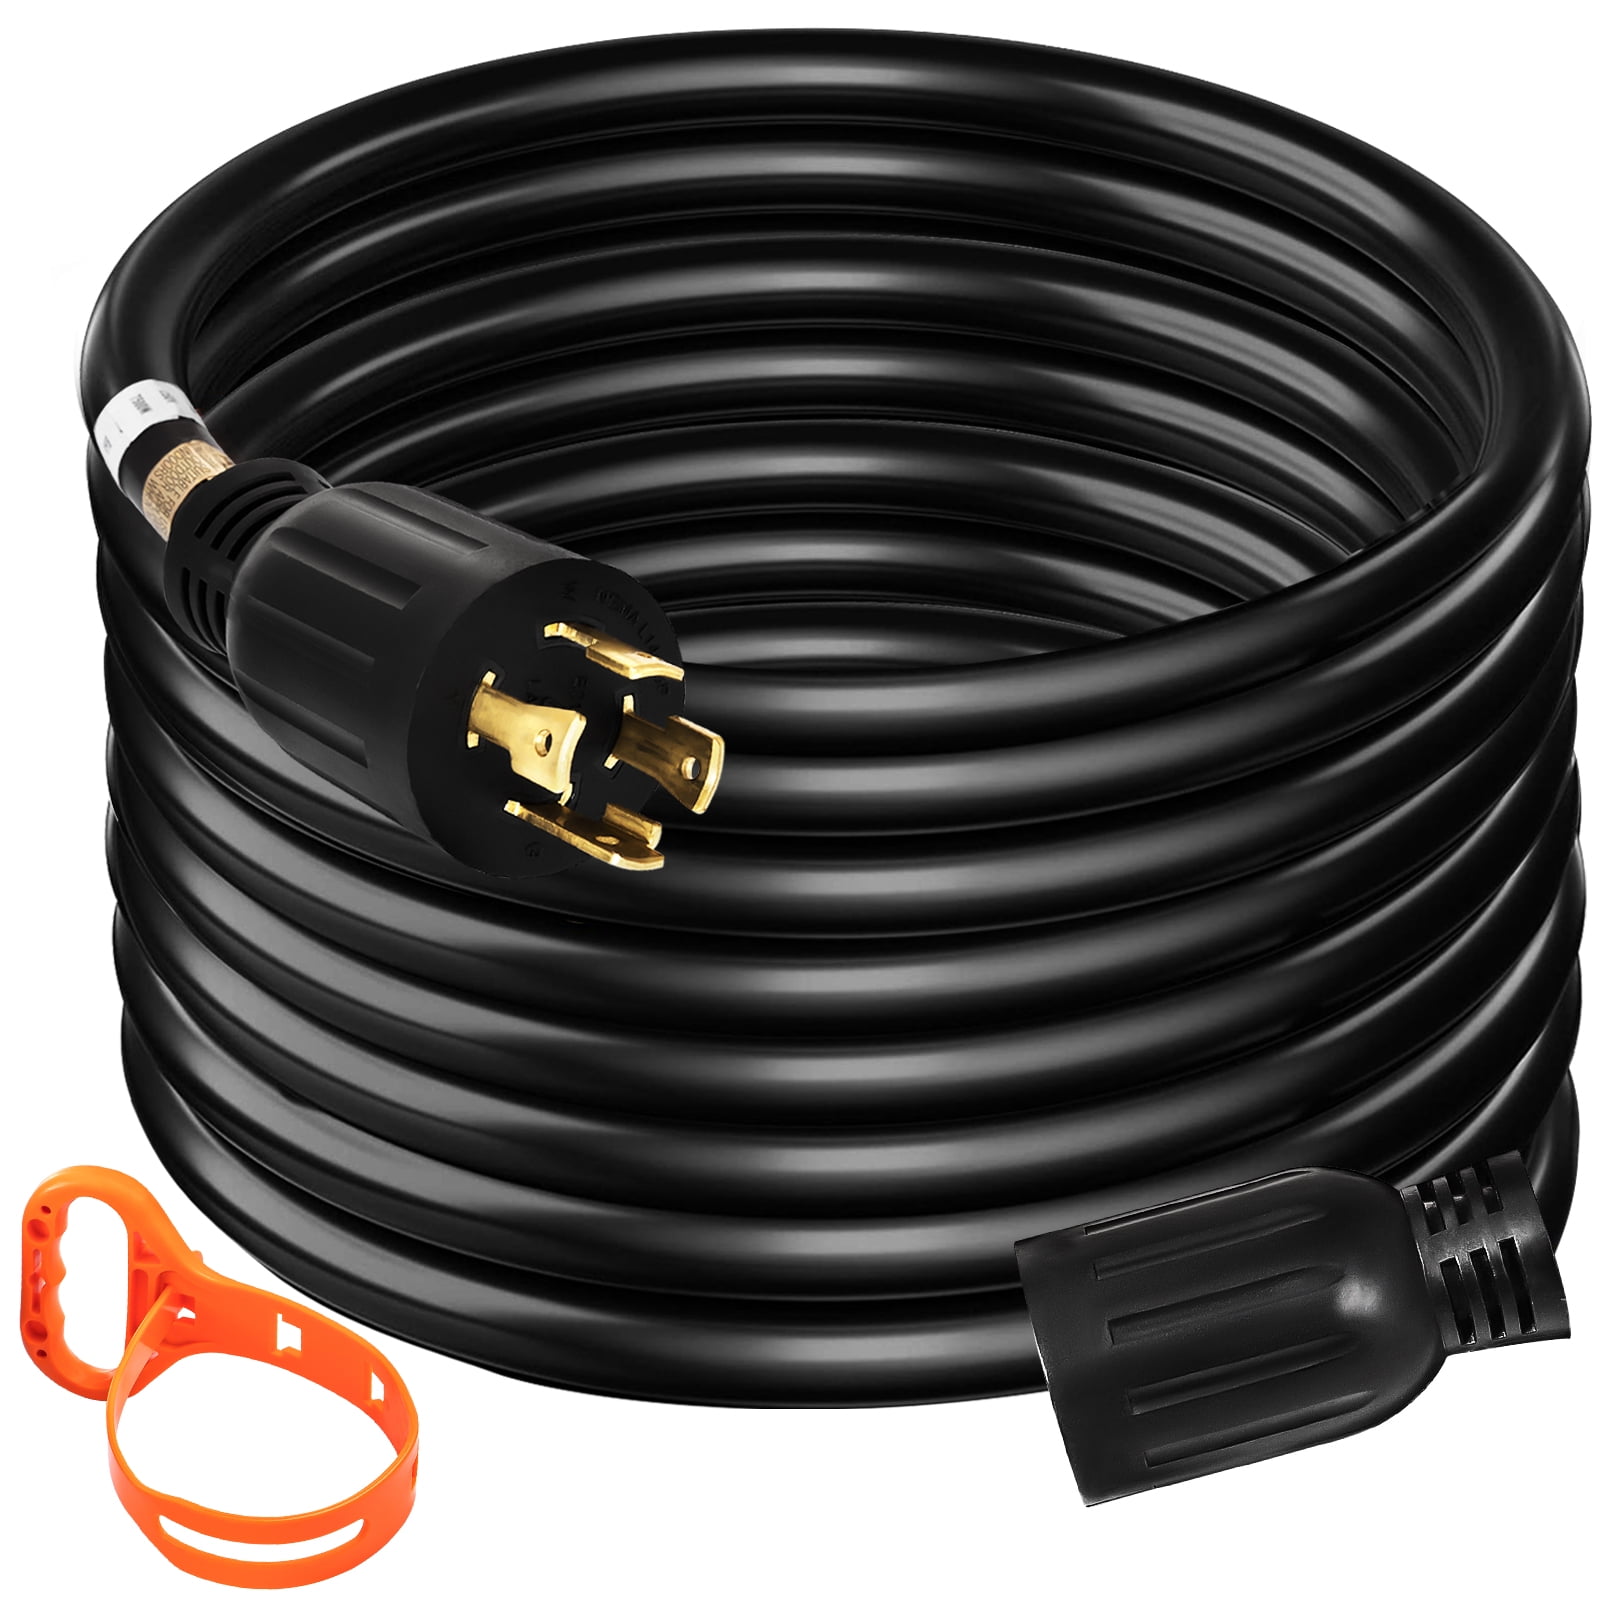 Generator Extension Cord 50 Ft 4 Prong Power Cable 10 4 30 Amp Adapter Plug New 